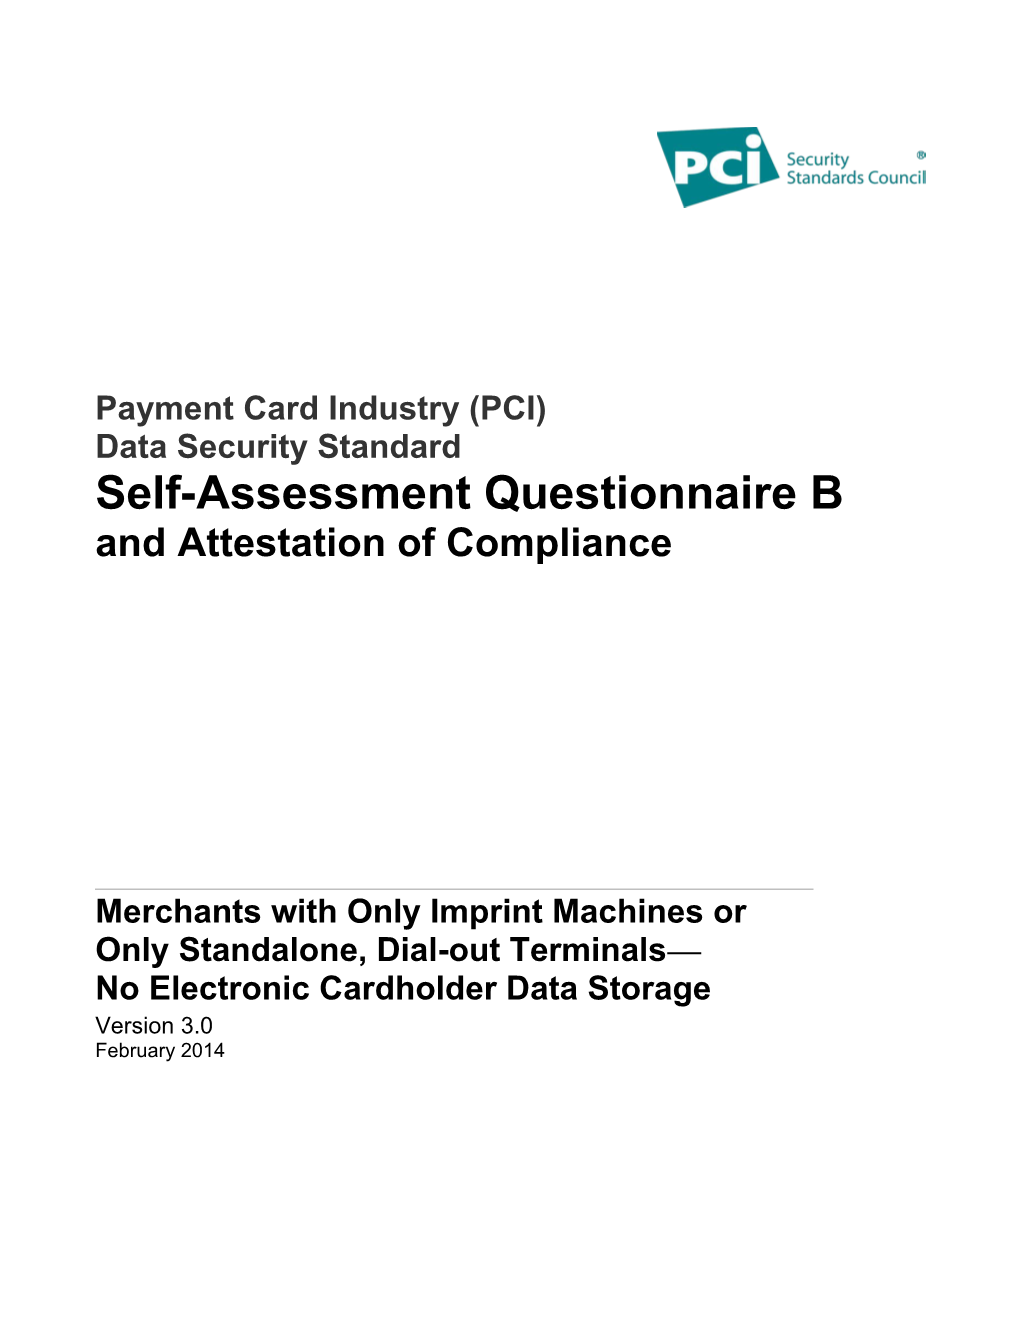 Payment Card Industry (PCI) Data Security Standard Self-Assessment Questionnaire B And